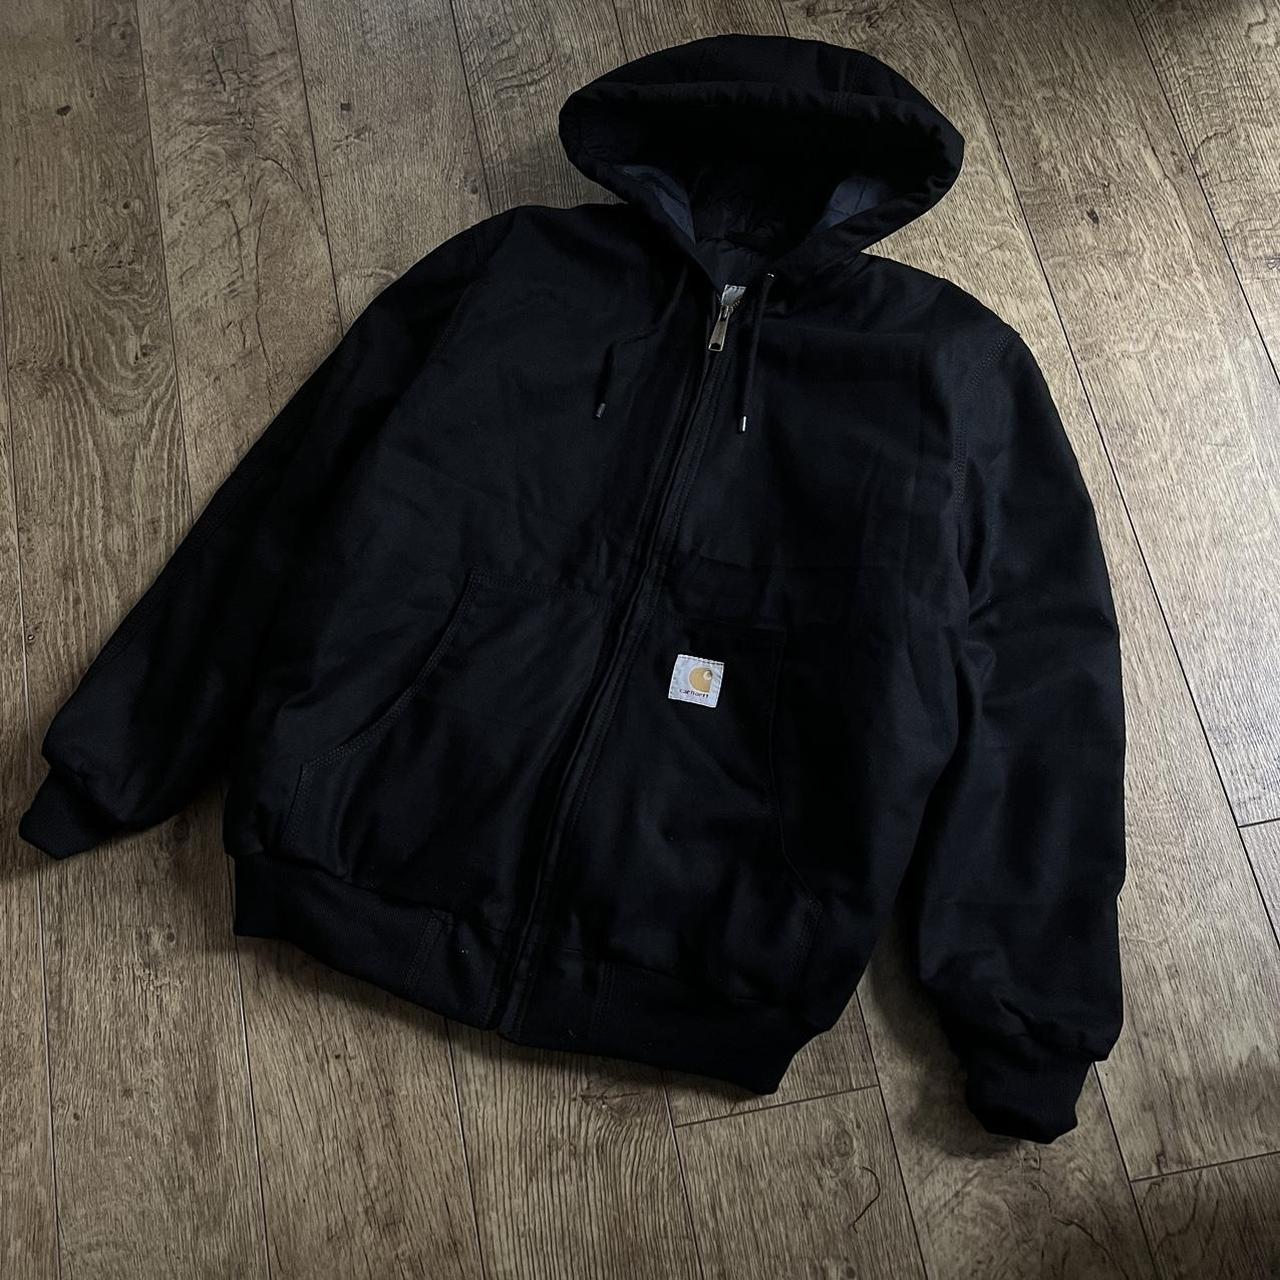 RARE Vintage Carhartt Blacked Out Reworked Hooded... - Depop